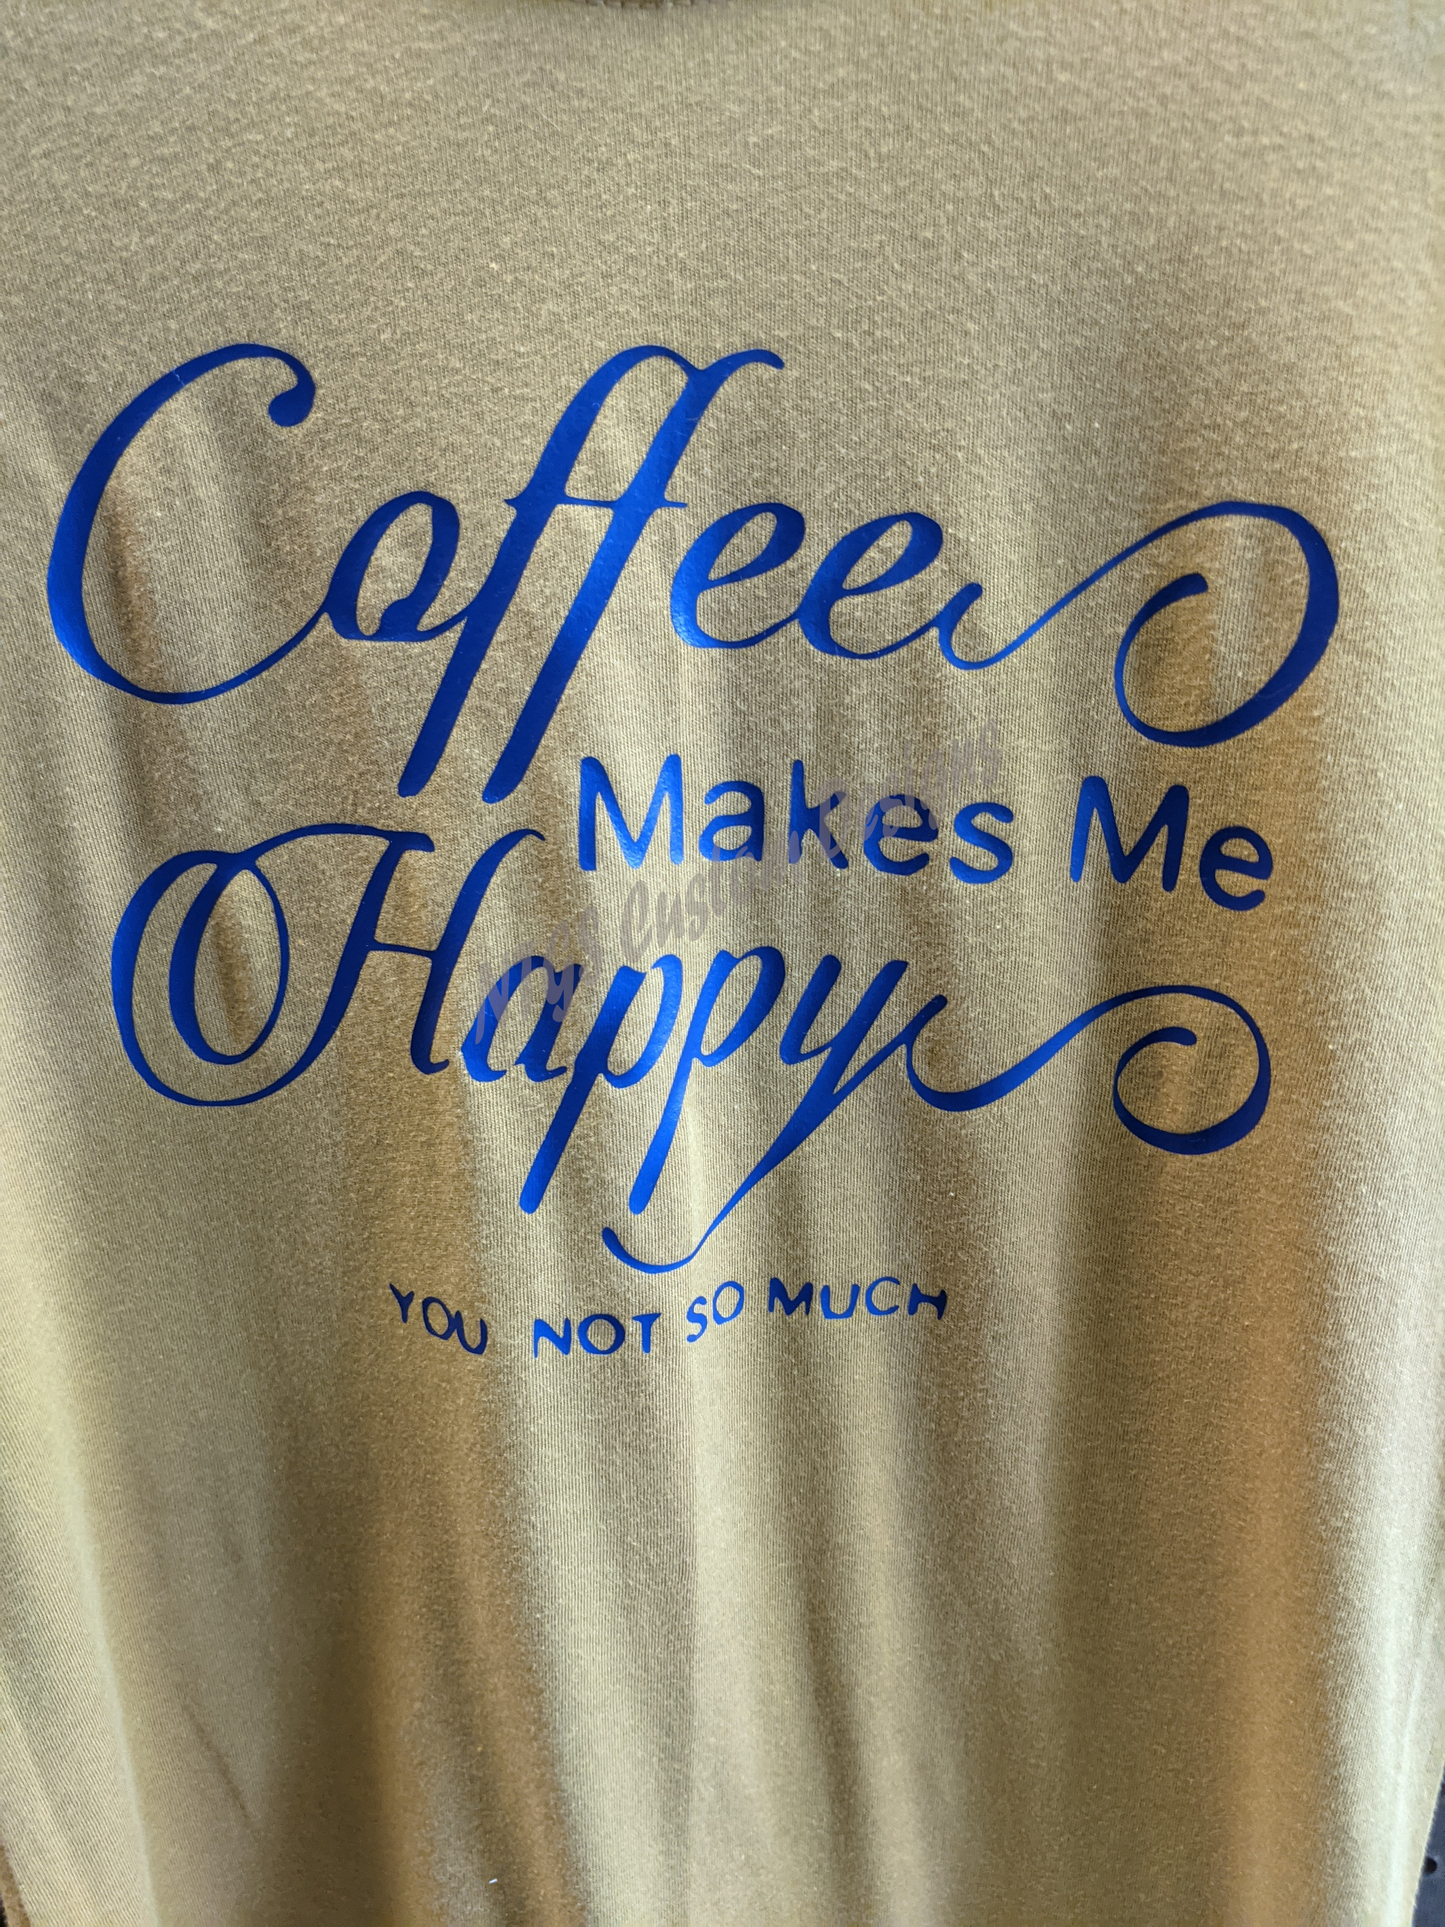 Coffee makes me happy, you not so much